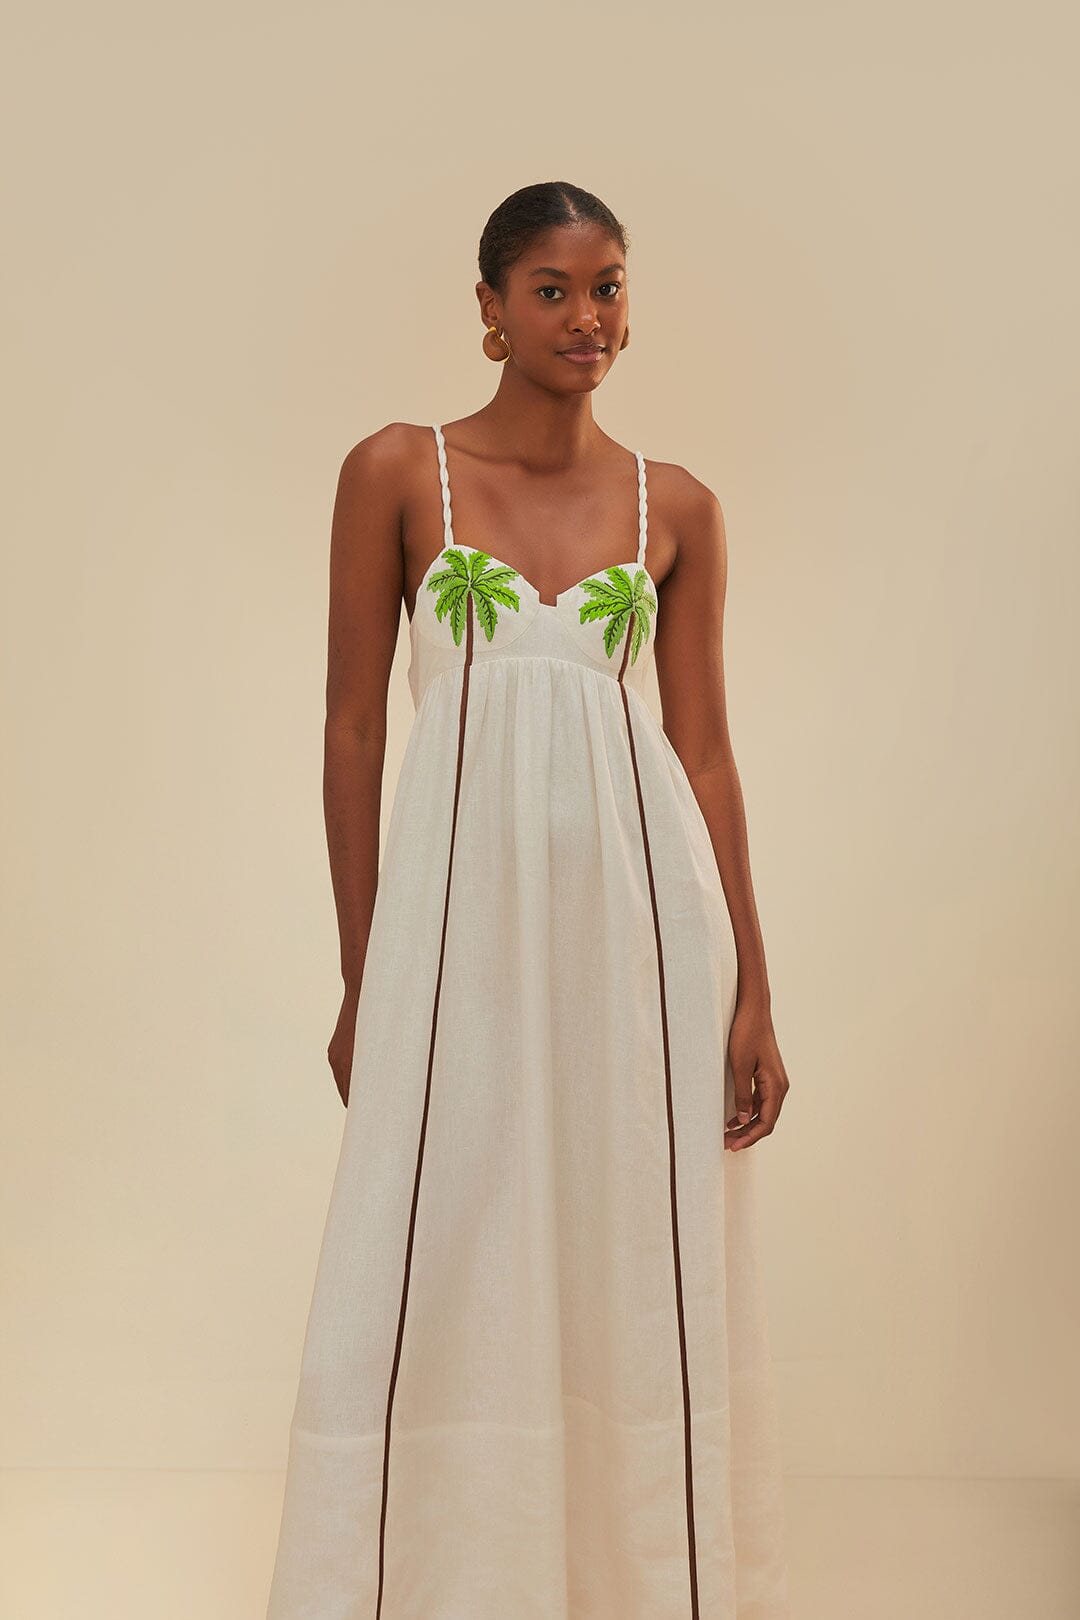 Coconut Tree Embroidered Maxi Dress